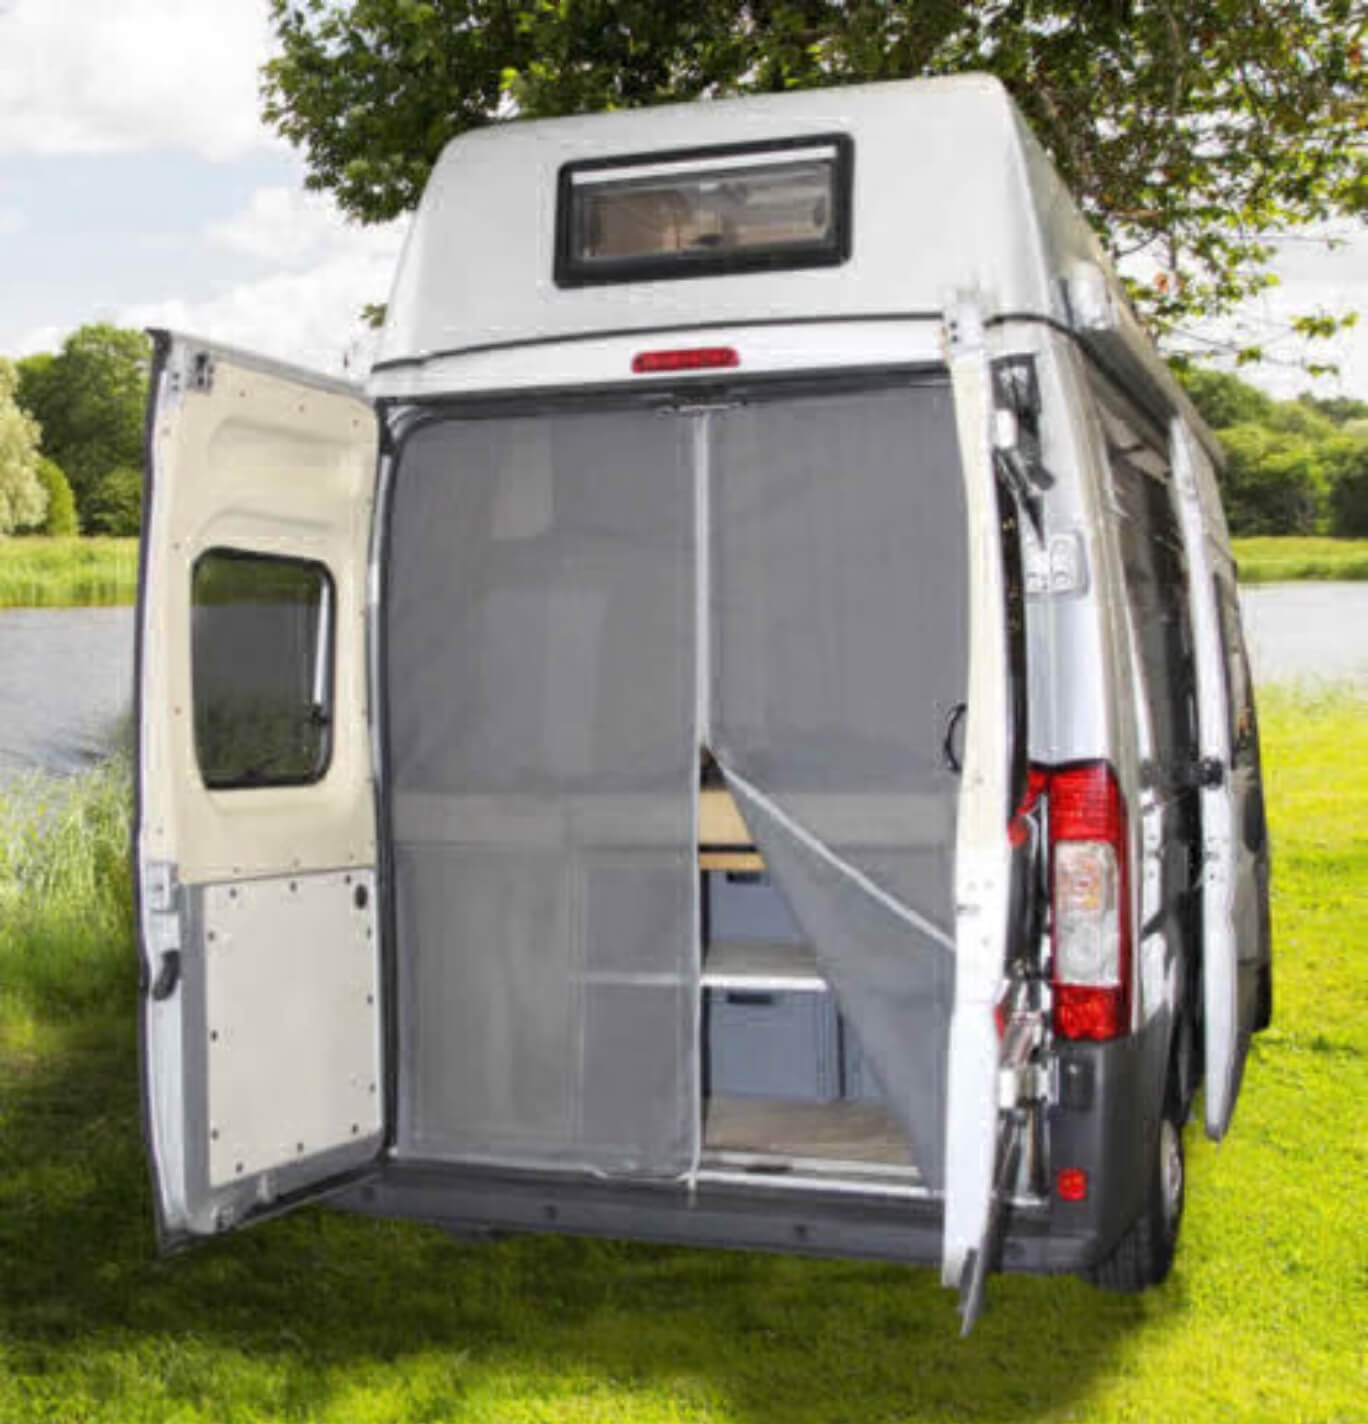 Mosquito net for sliding door - Fiat Ducato and the like from 2012, Flyscreen for Campervan, Van Windows, Caravan Windows, Camper Windows,  Blinds, Vents, Camping Shop